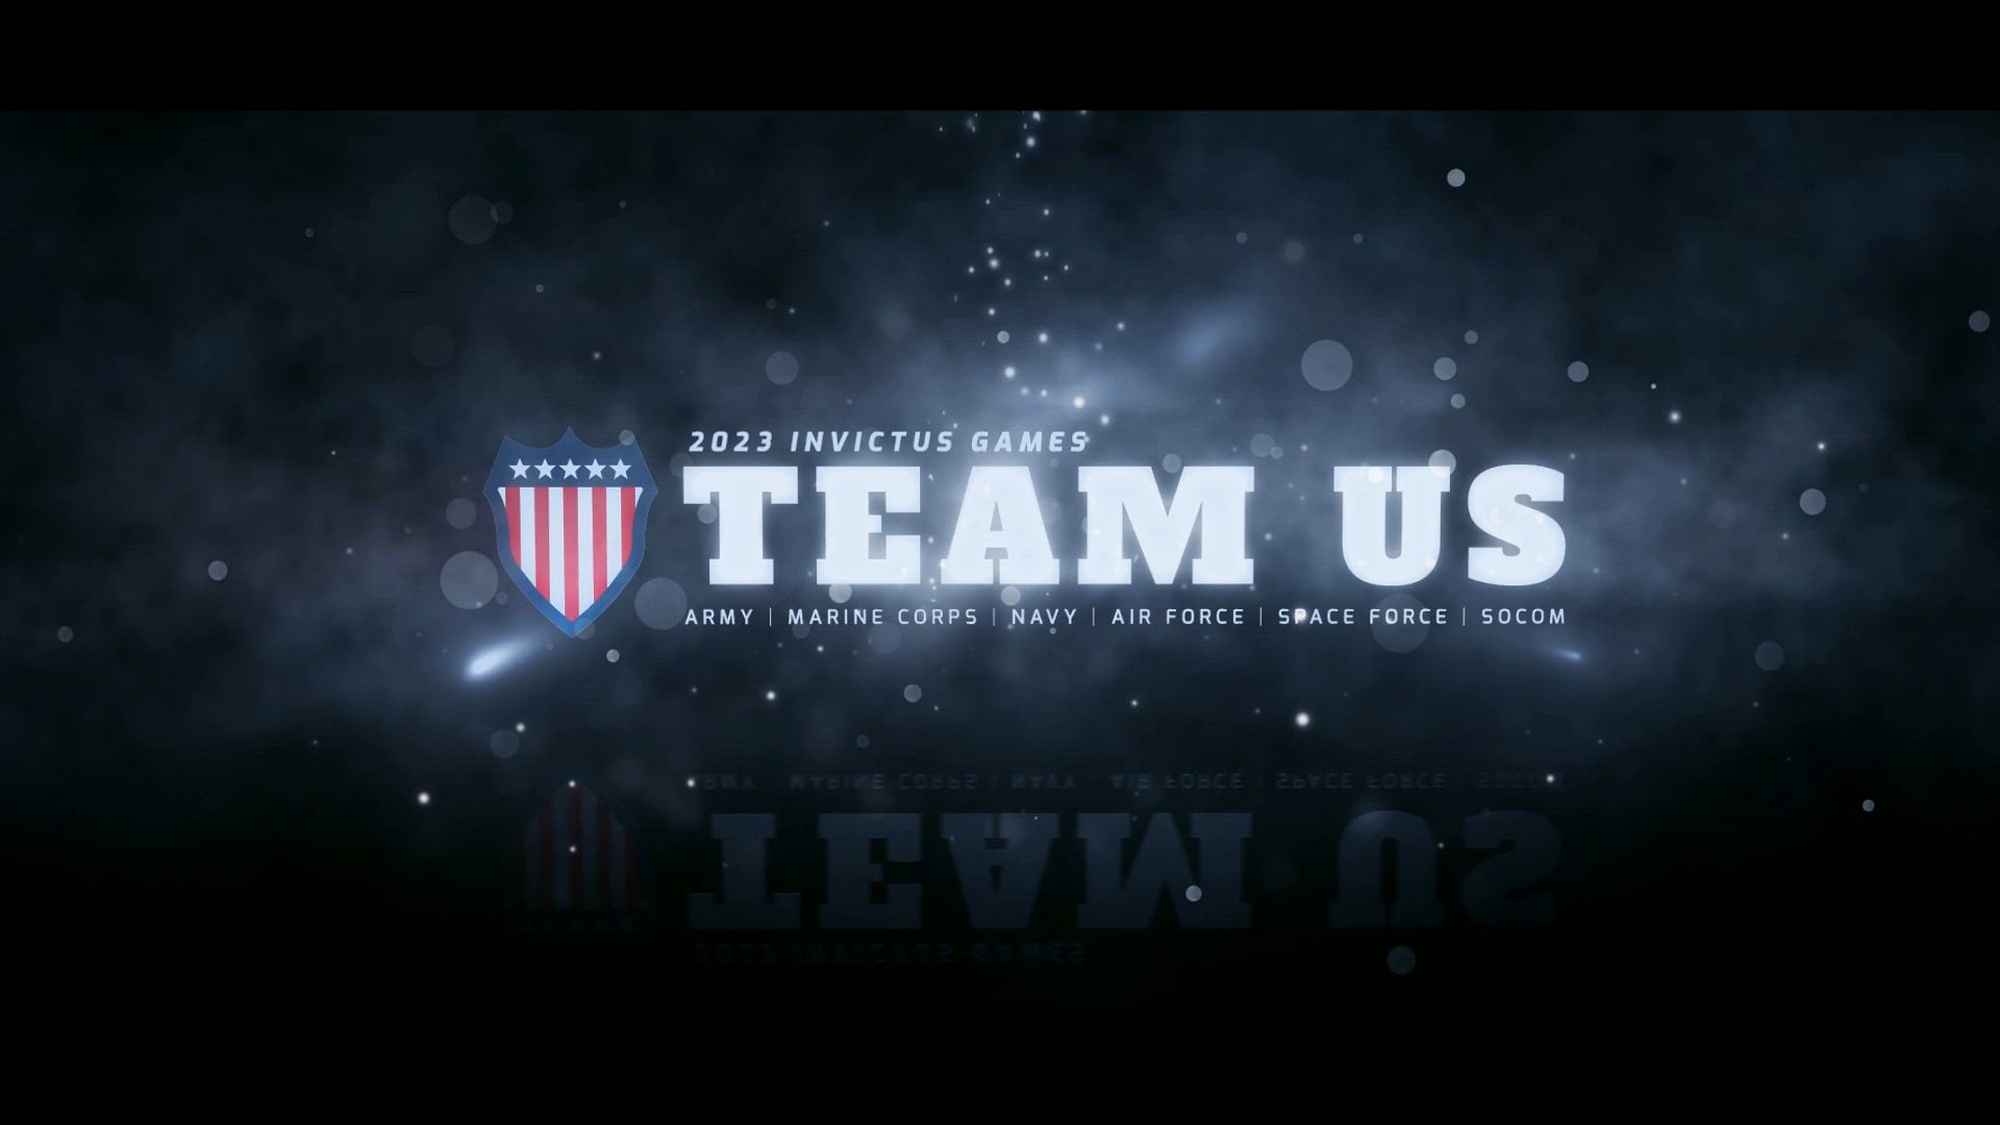 Team U.S. athletes arrive in Alexandria, Va., for the final Invictus team camp on Aug 31, 2023, where they also receive their gear in preparation for the upcoming Invictus Games. In total, 59 competitors will represent the United States at the Invictus Games Düsseldorf 2023, from Sep 9-16, 2023.